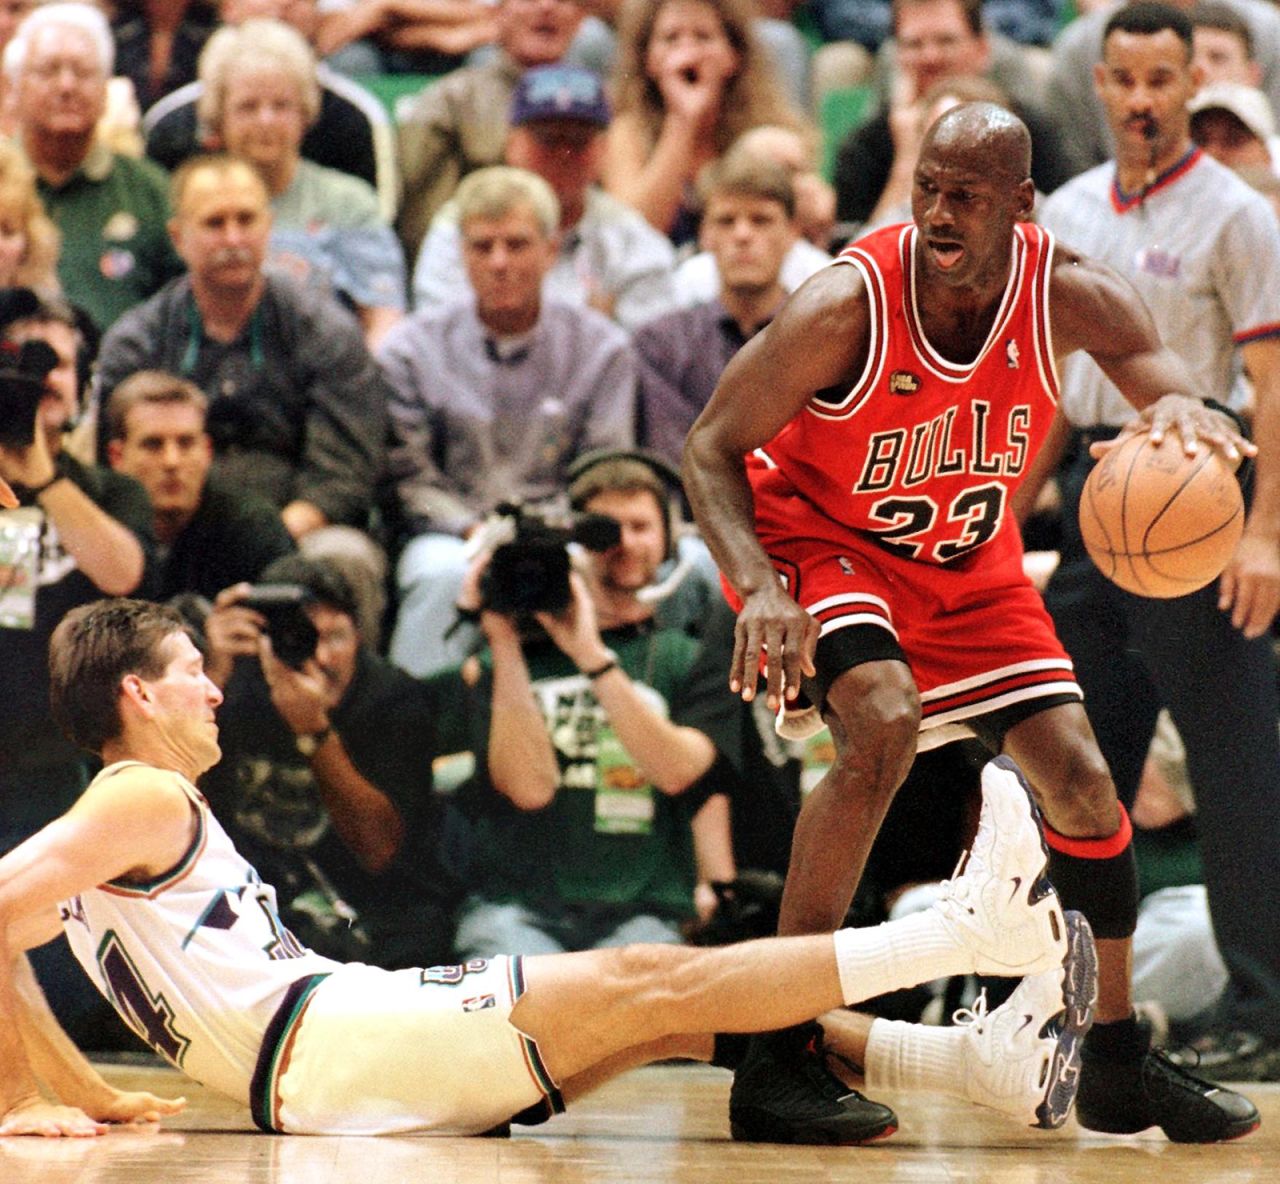 Michael Jordan was photographed wearing the record-breaking sneakers during the NBA Finals at the Delta Center in Salt Lake City, Utah on June 5, 1998.